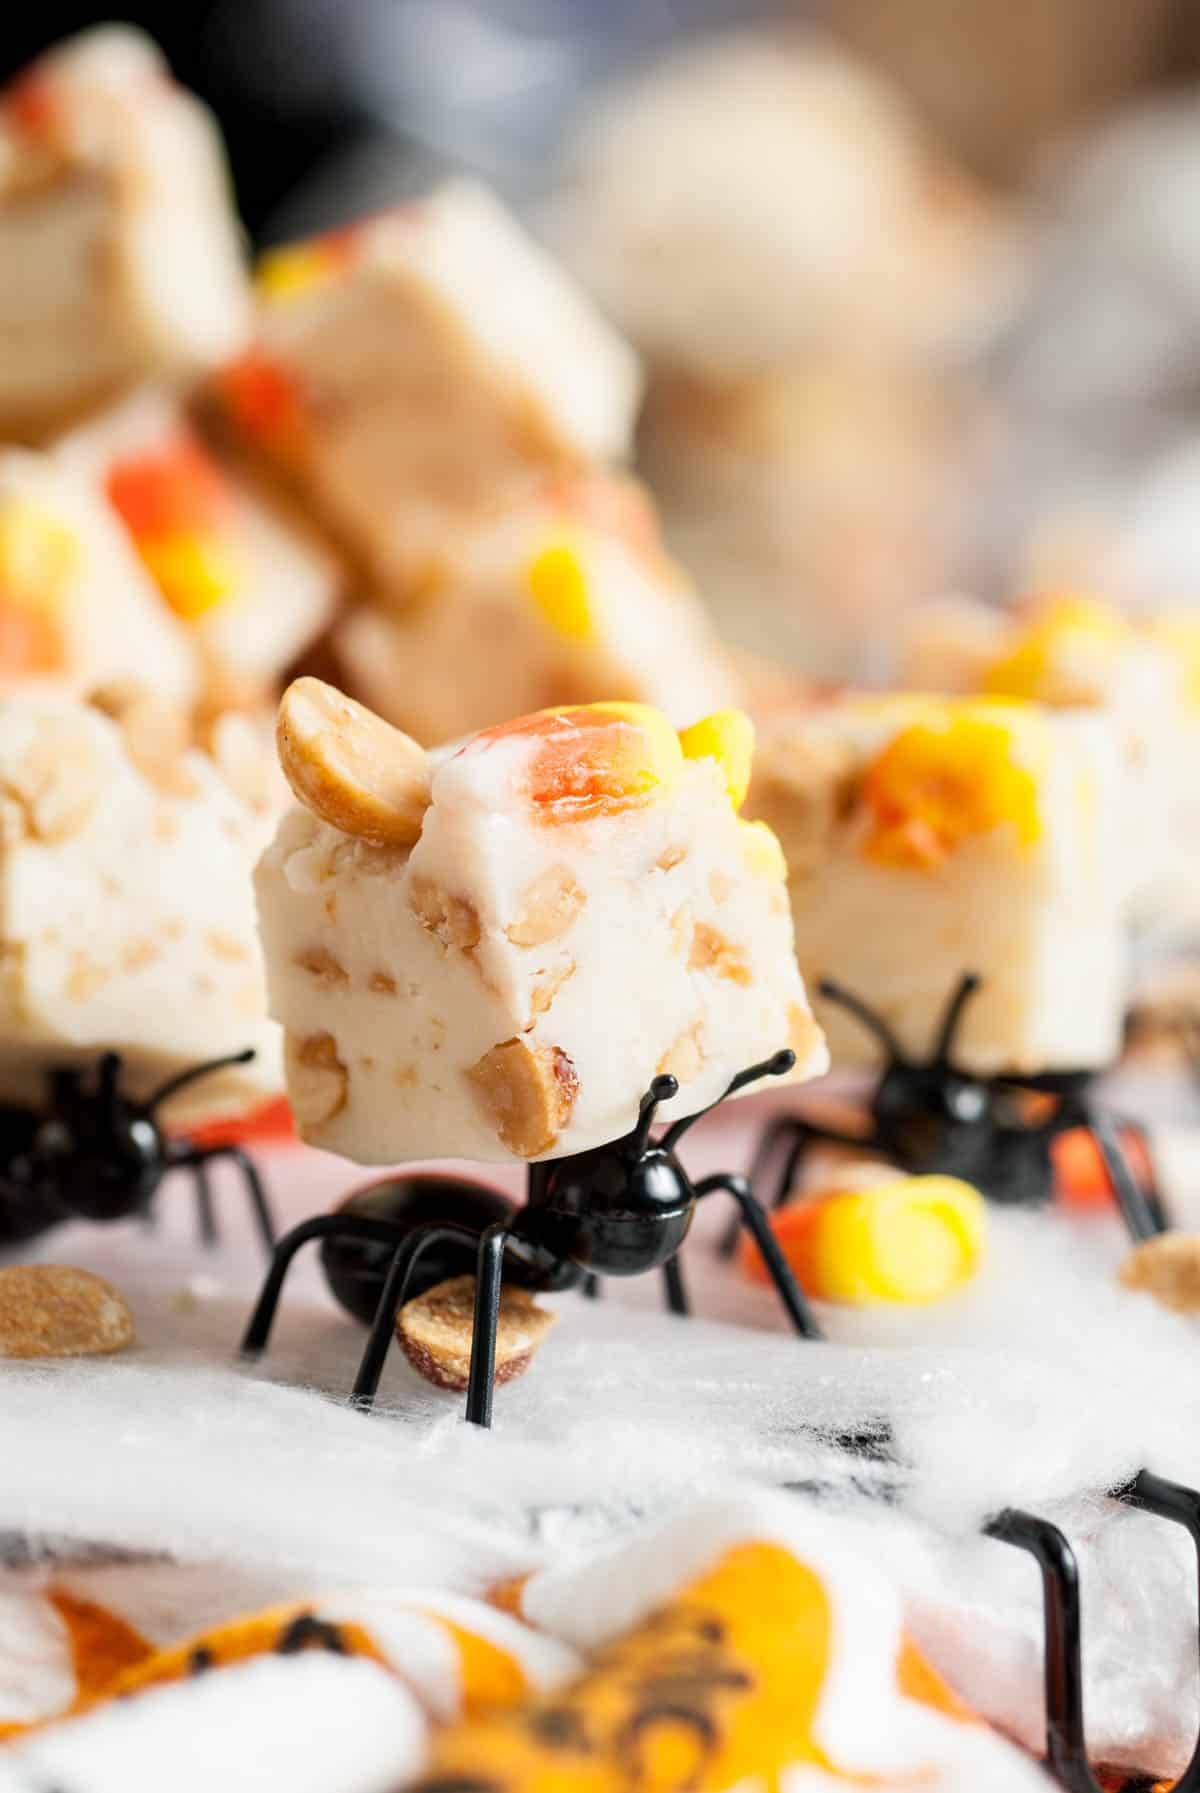 A plastic ant carrying a piece of candy corn fudge on its back.